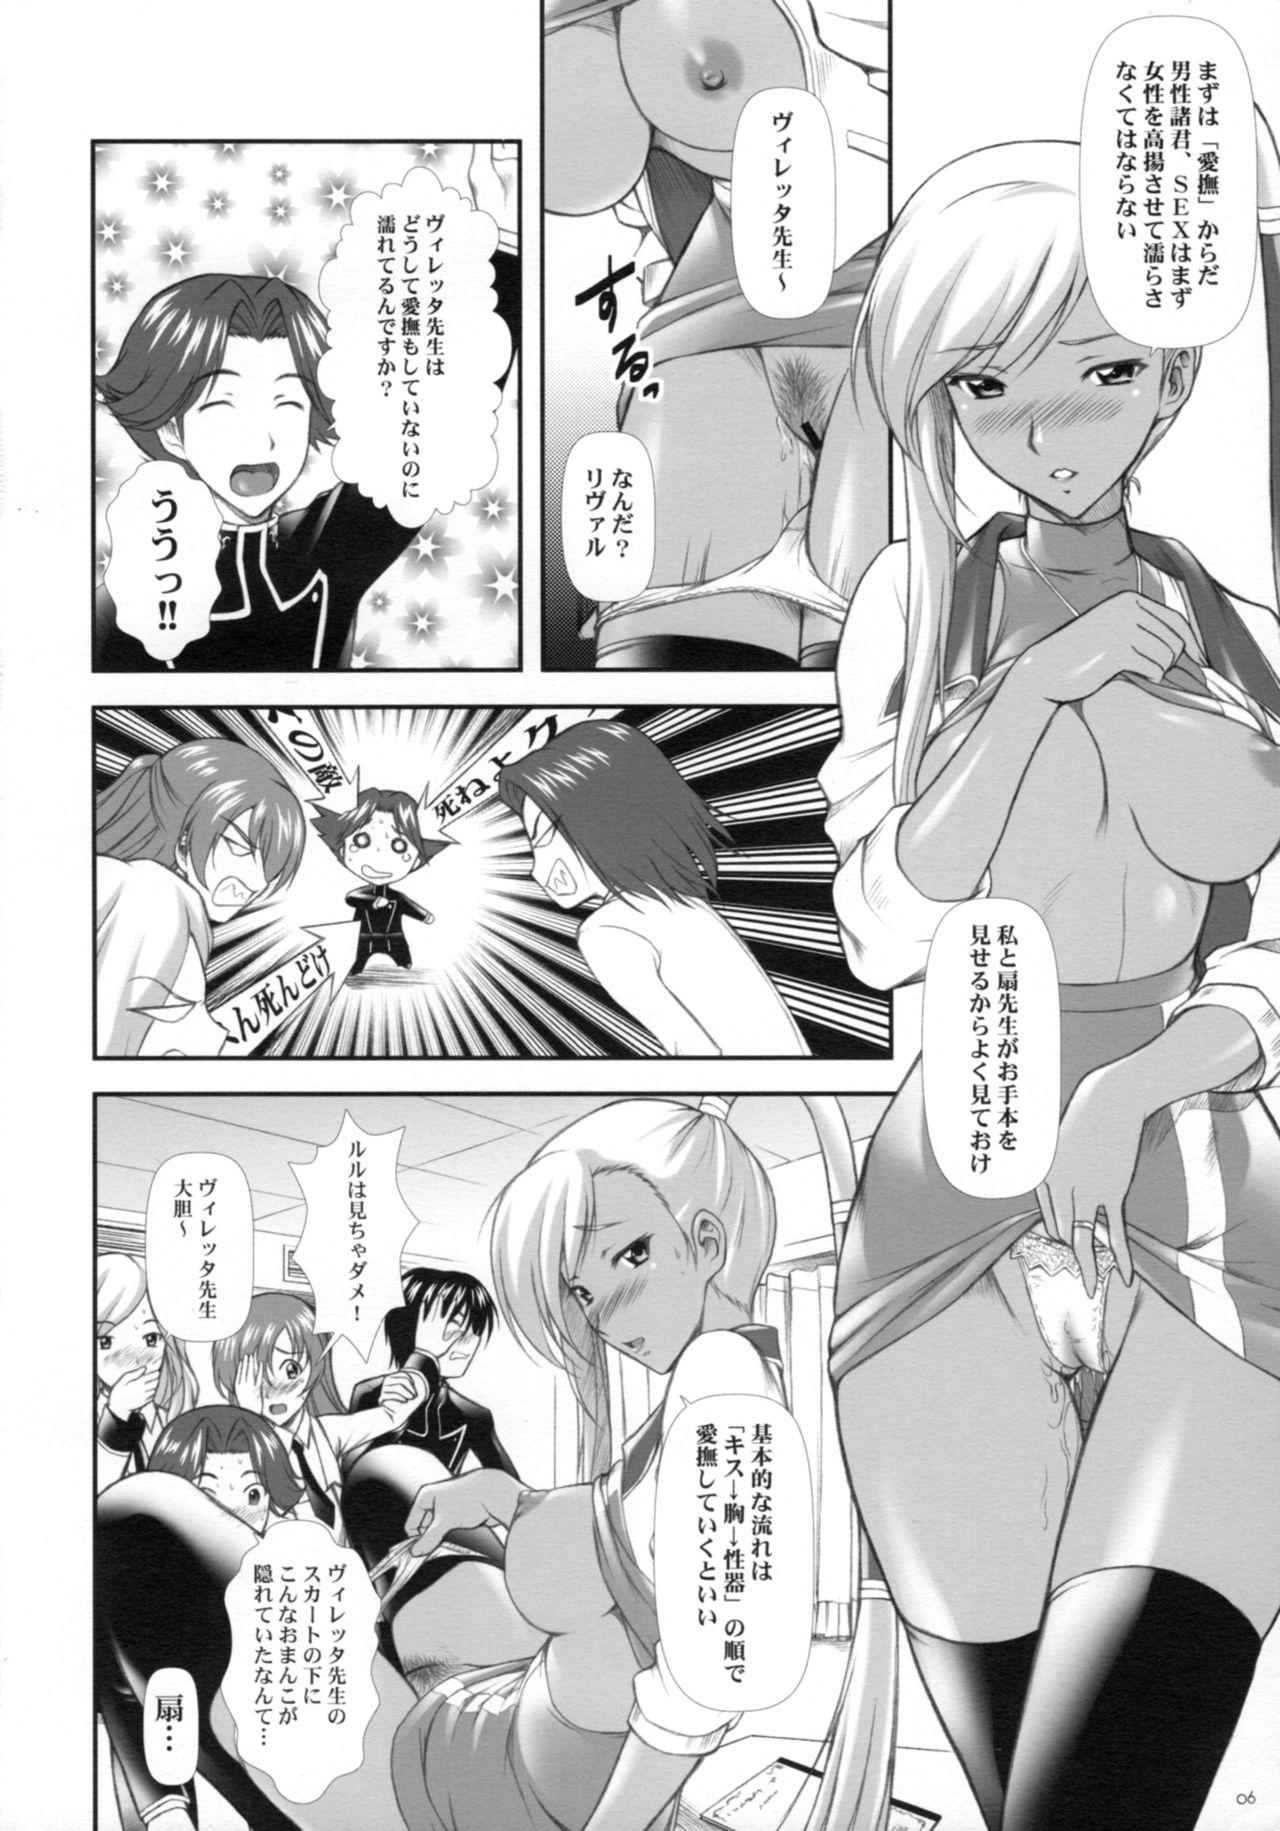 Chica Campus Mission COMIKET 74 Kaijou Gentei Bon - Code geass Ballbusting - Page 5